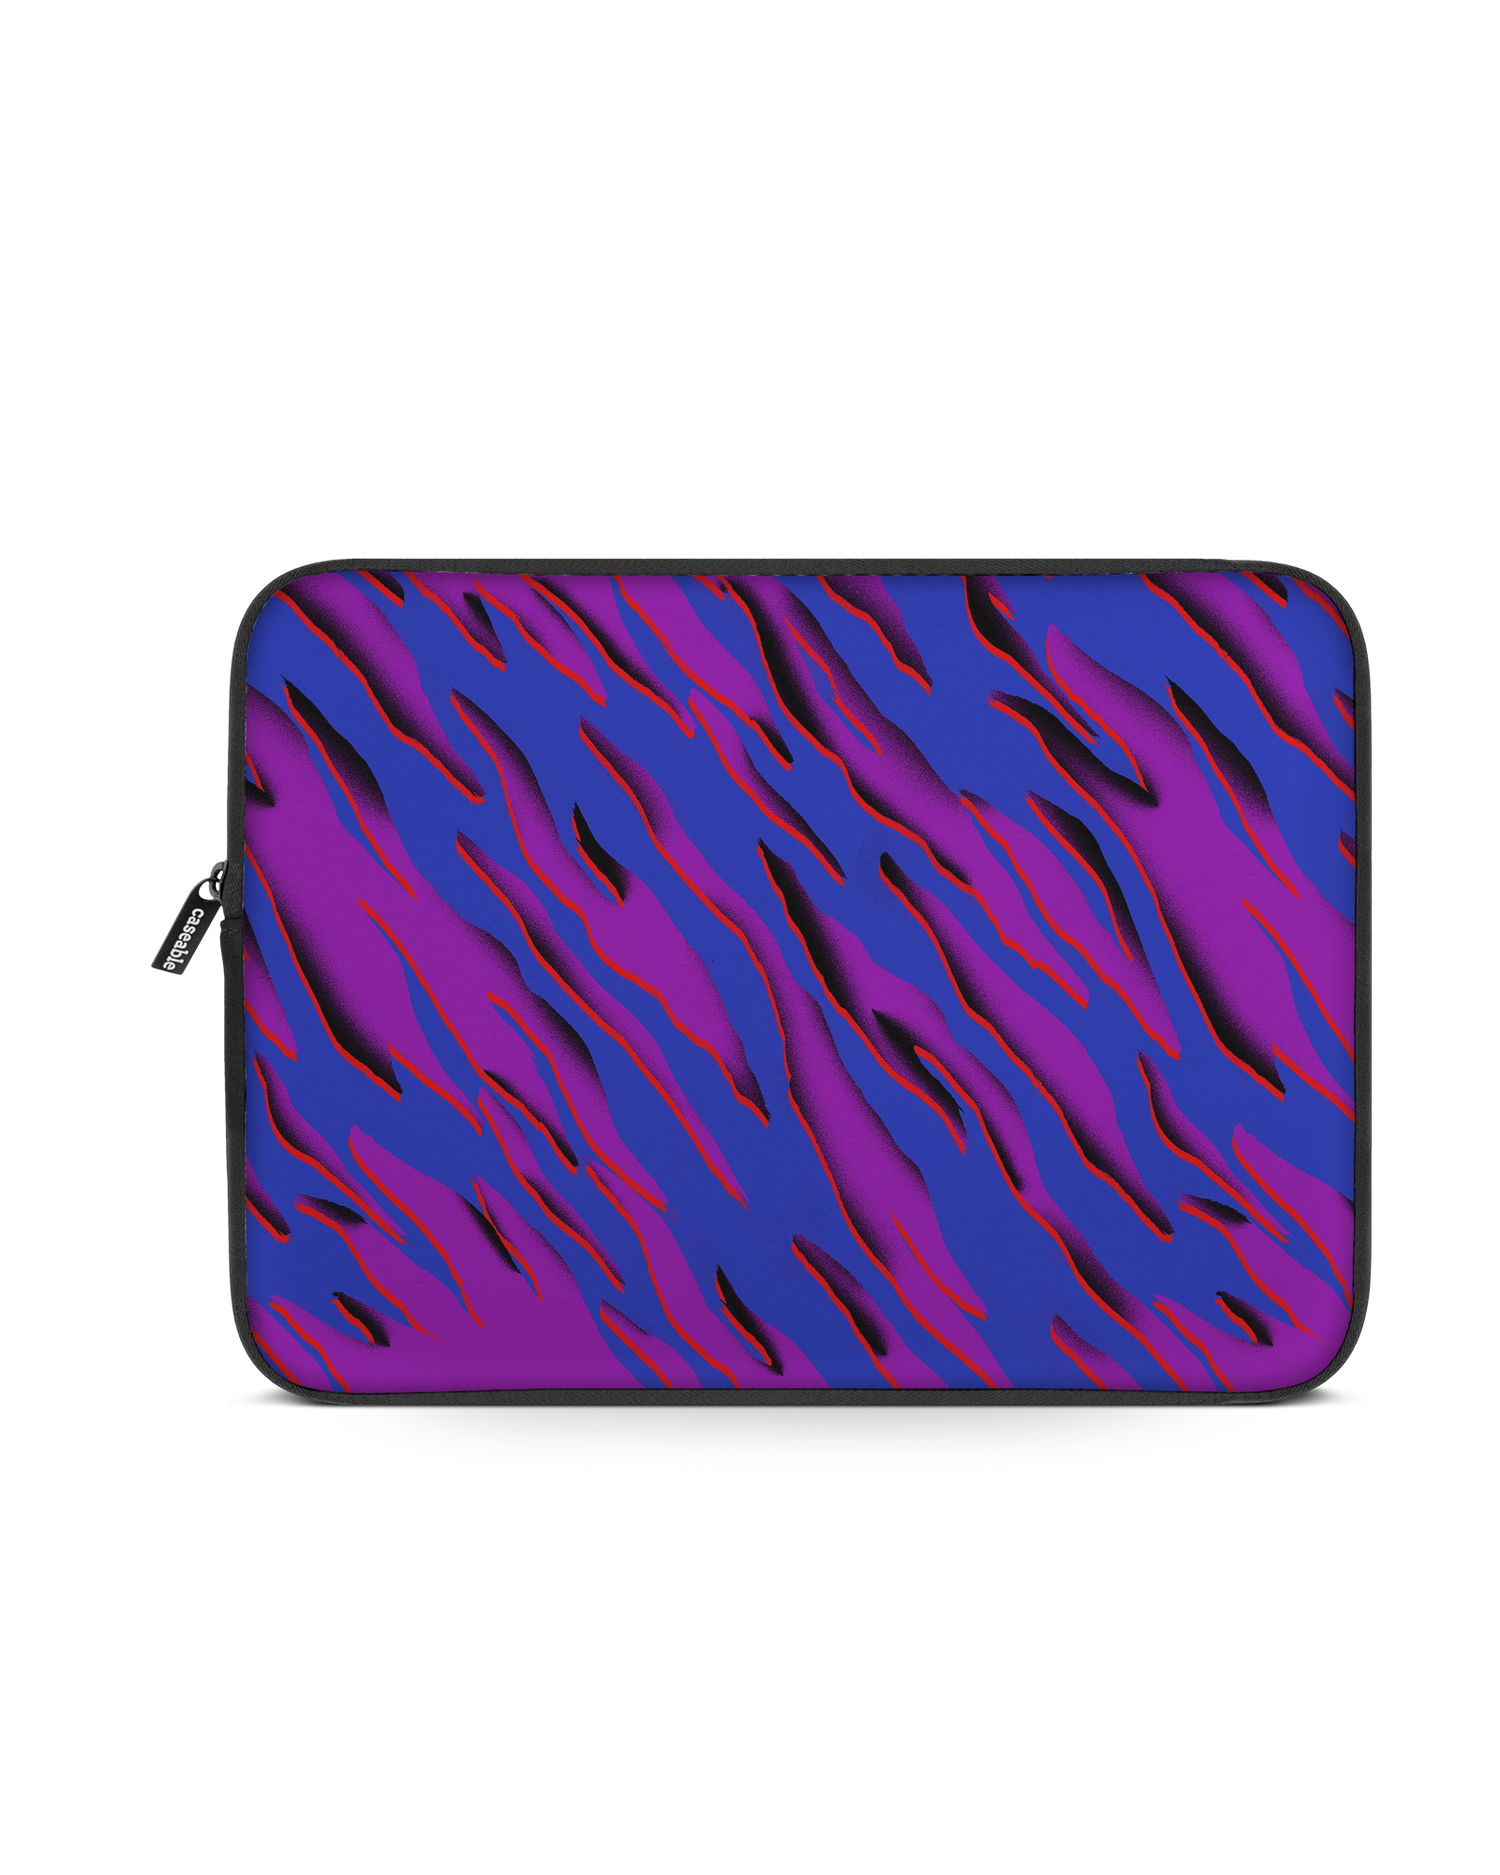 Electric Ocean 2 Laptop Case 13 inch: Front View